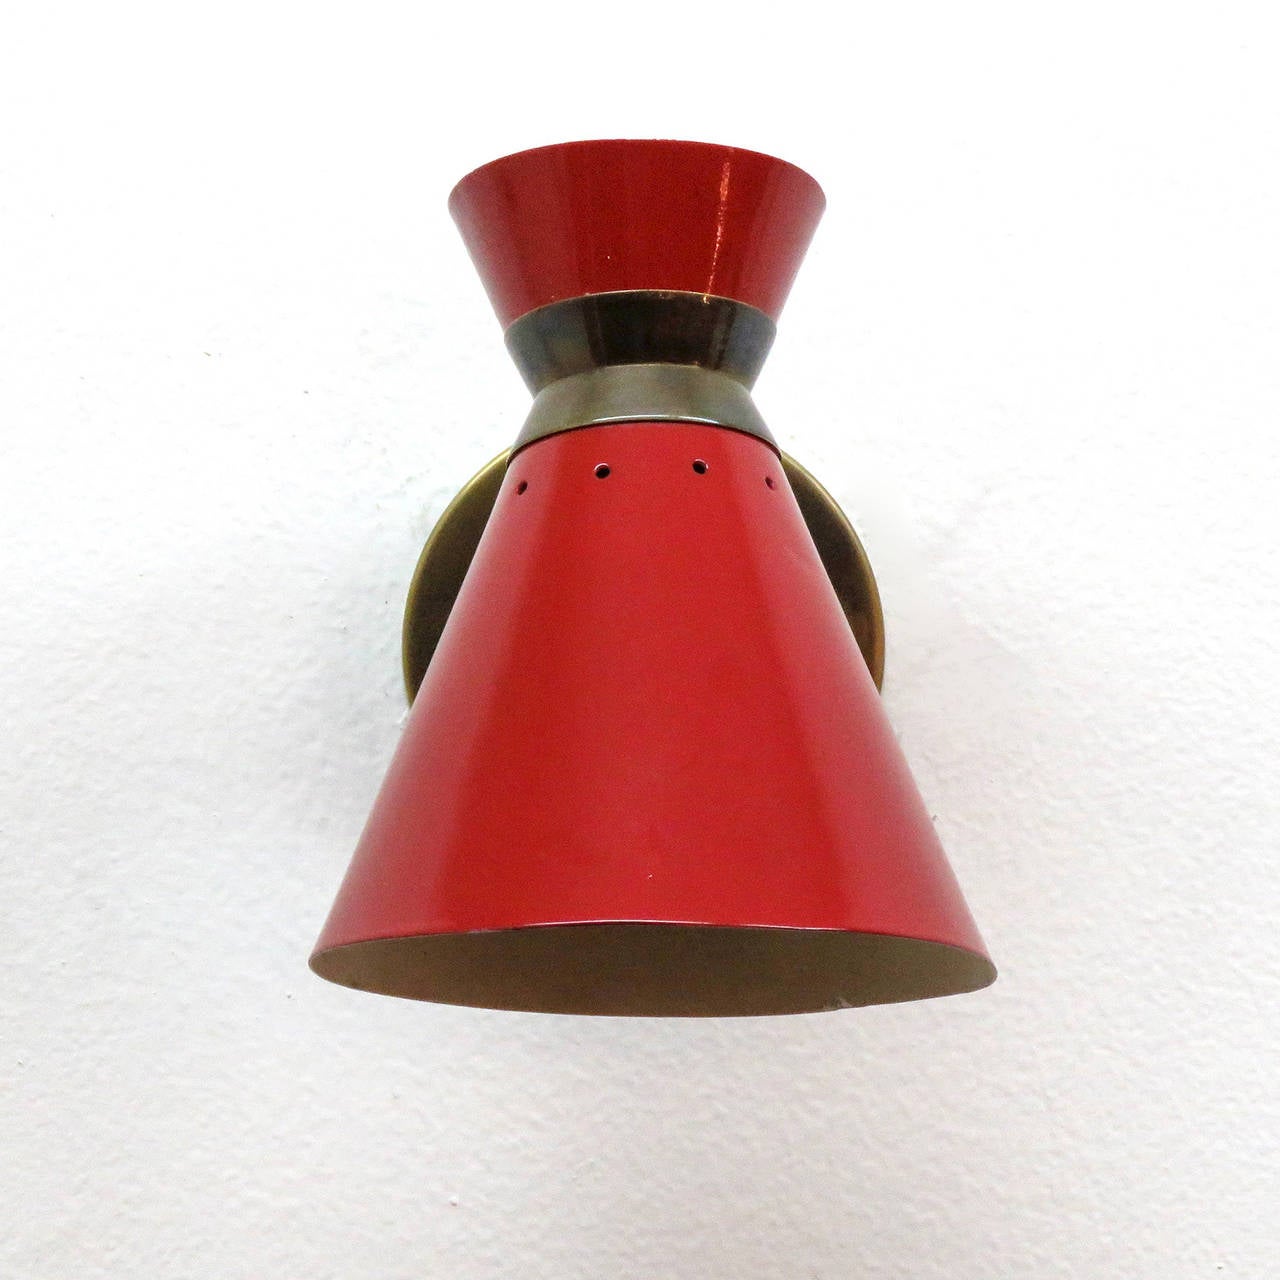 Elegant pair of French short stem double cone wall lights by Rene Mathieu in red enamel and brass, individual on and off switch. Rewired with original sockets, some wear to the interior enamel. One French socket per fixture, max. wattage 40w each,